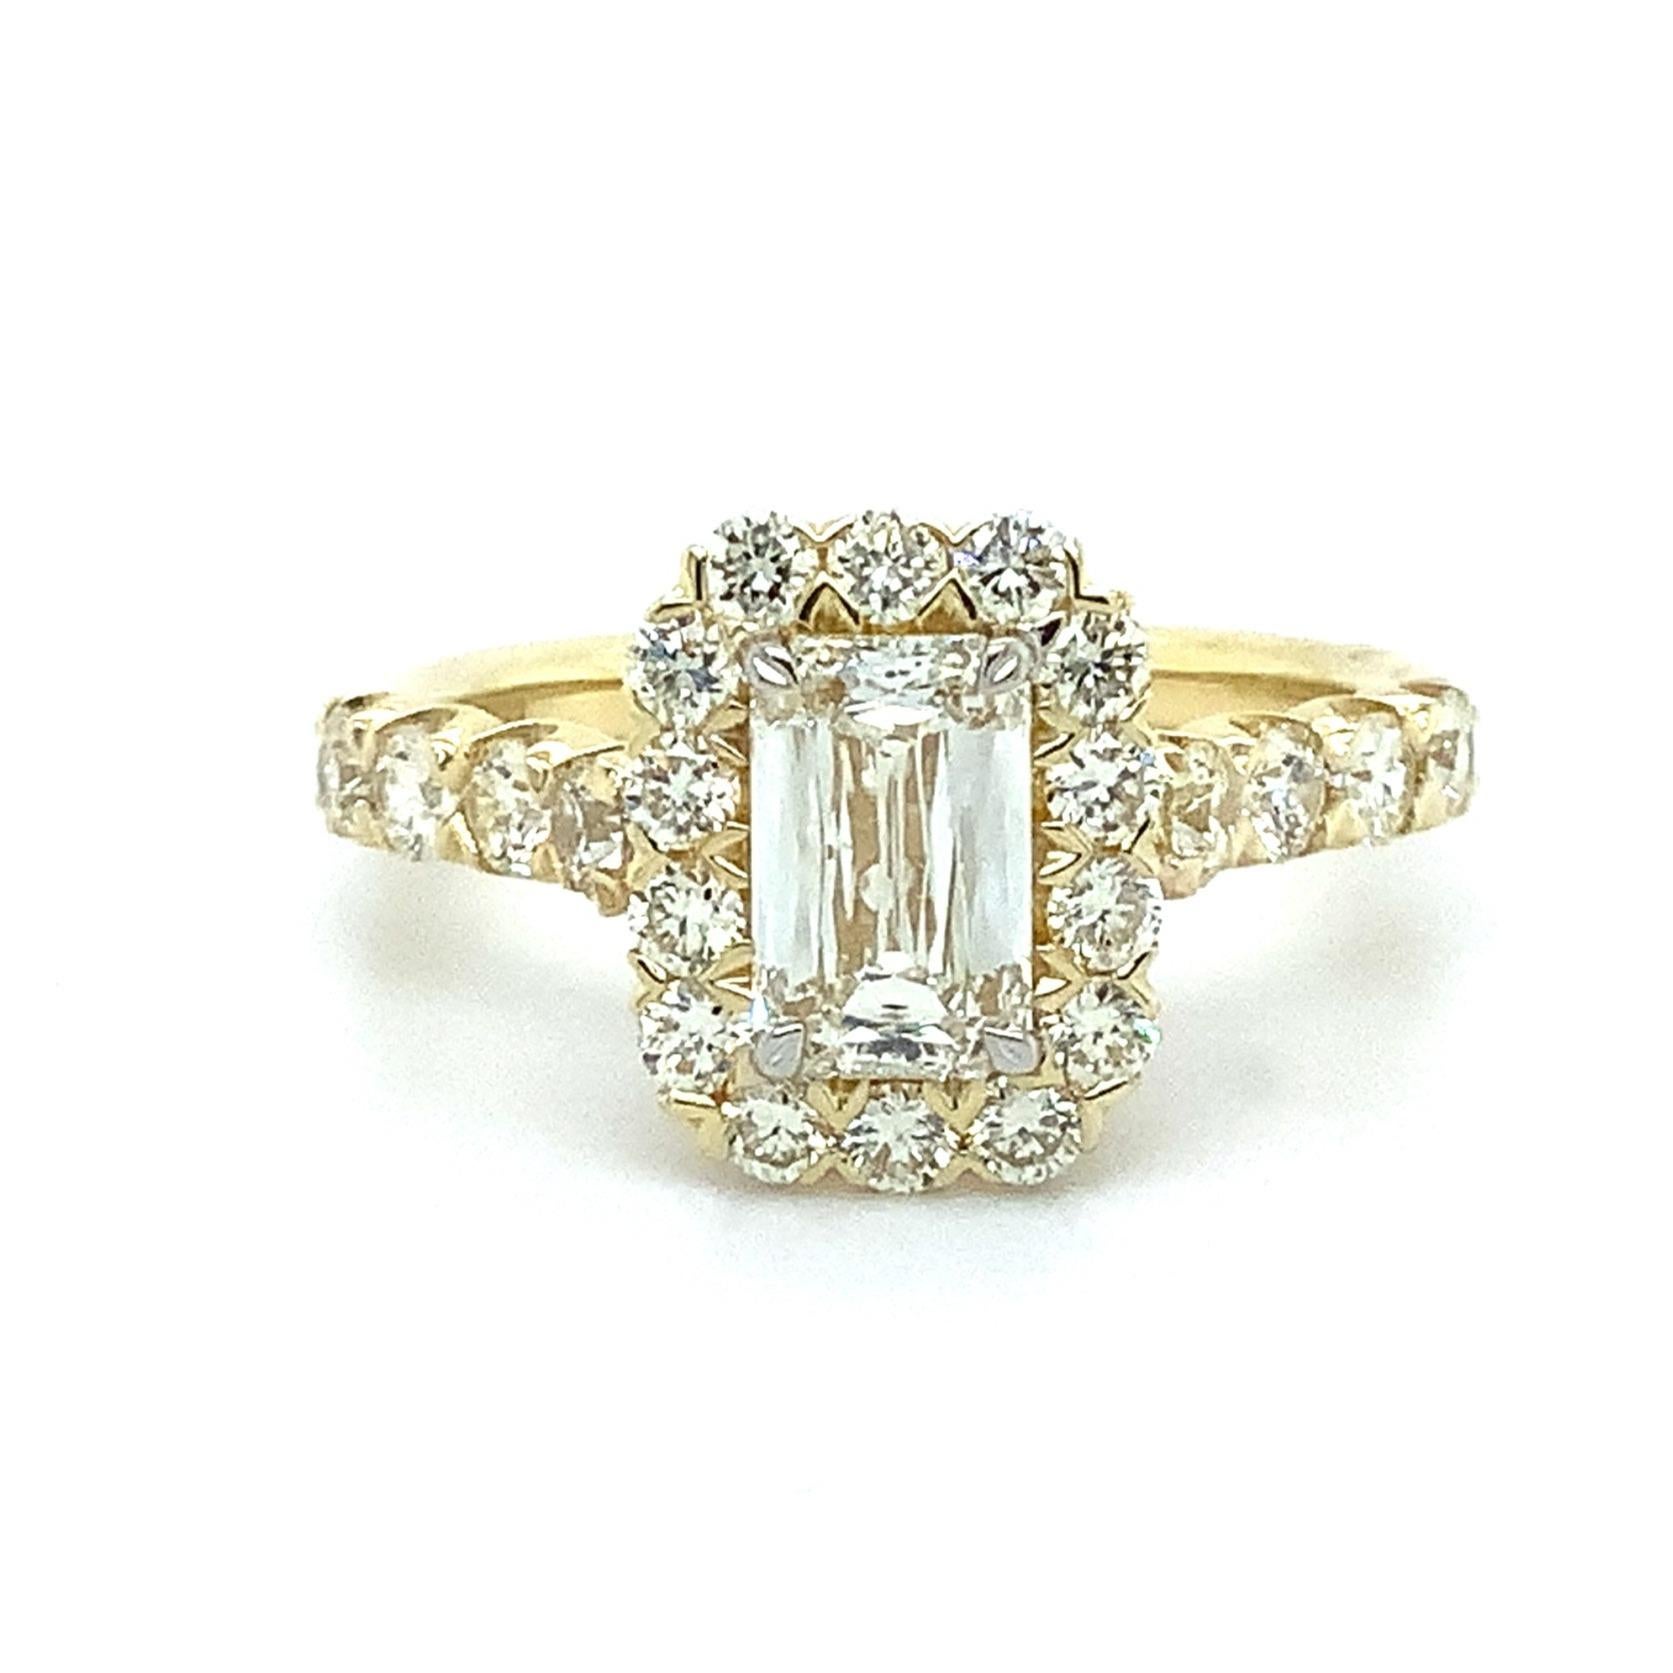 Christopher Designs Crisscut® Diamond Engagement Ring 18K Yellow Gold 30 round brilliant Diamonds  0.87 ctw. GIA Certified.

Calling all Emerald Cut Lovers, This ring Boasts Features 1 Crisscut® Emerald Cut Diamond 1.02 cts. 

GIA #